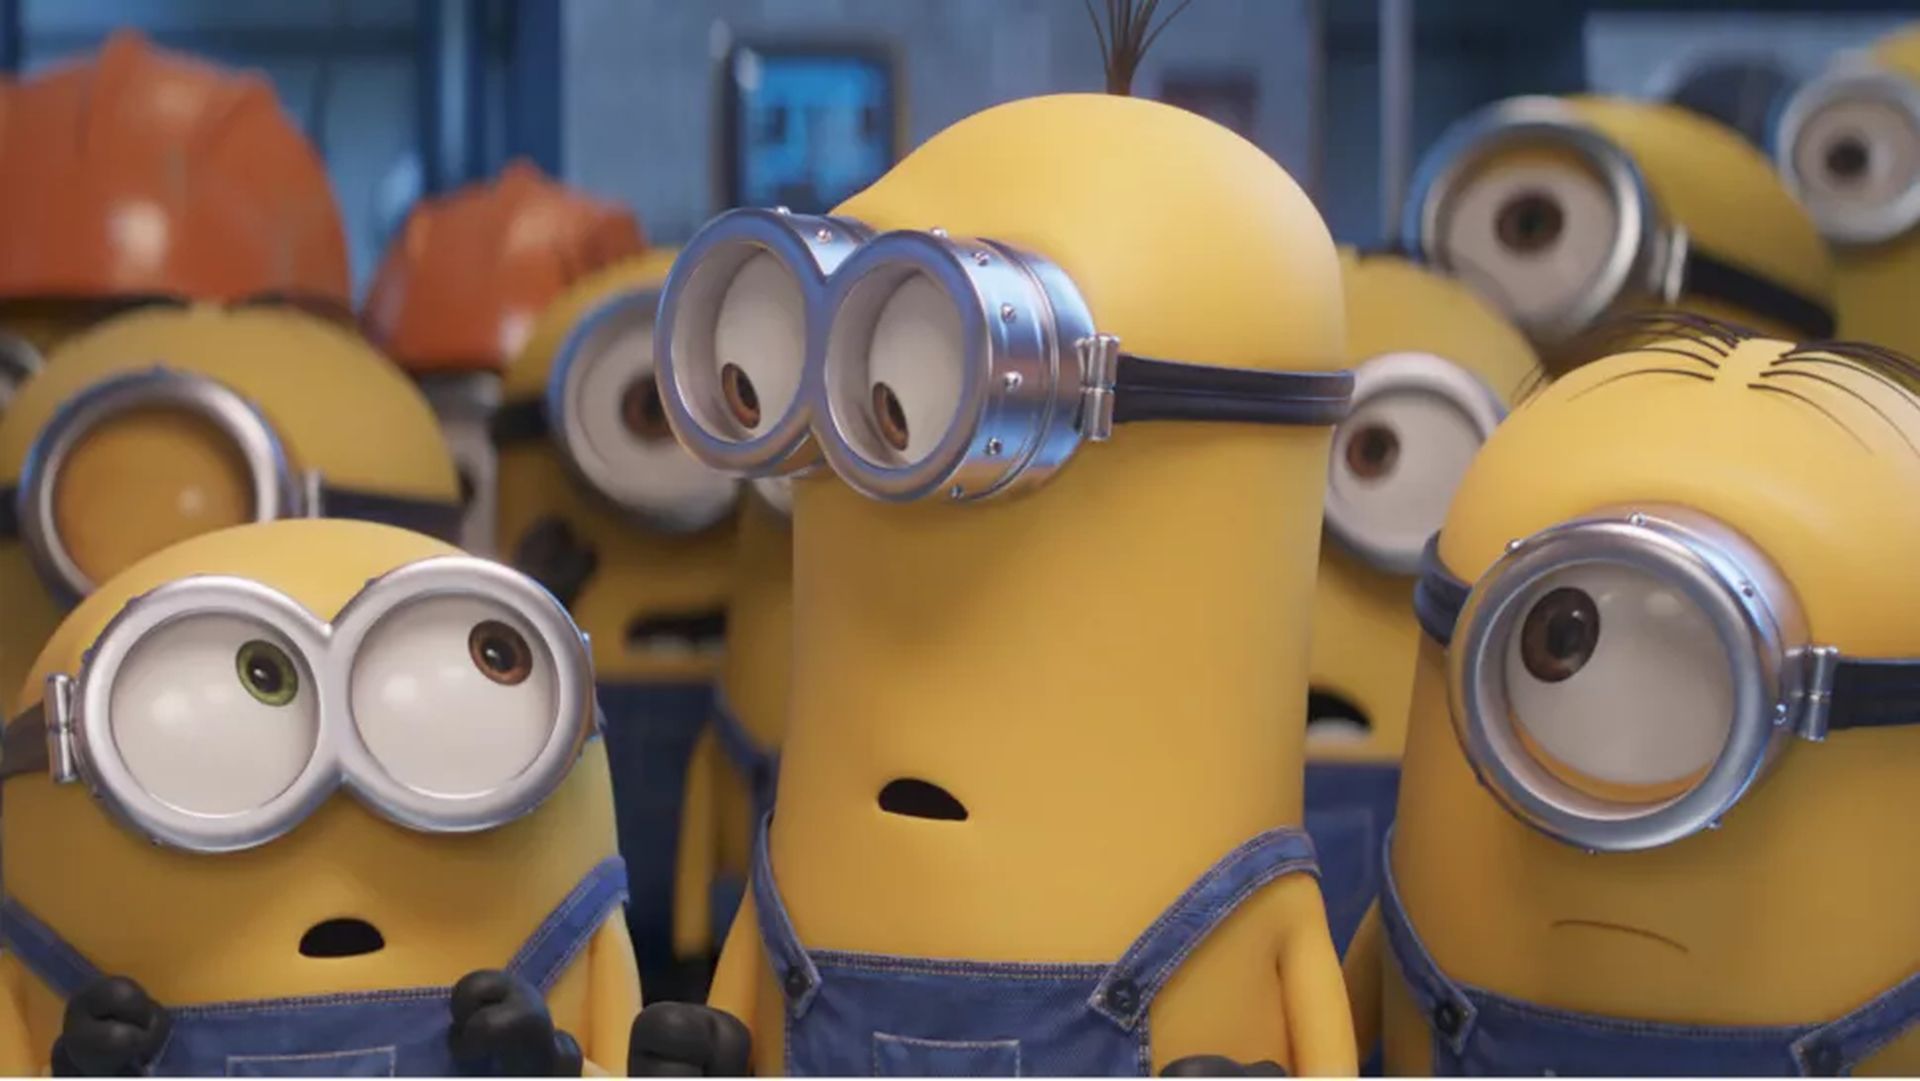 In this article, we are going to go over Minions movie TikTok trend which has been making waves around the globe for its hilarity and absurdness.